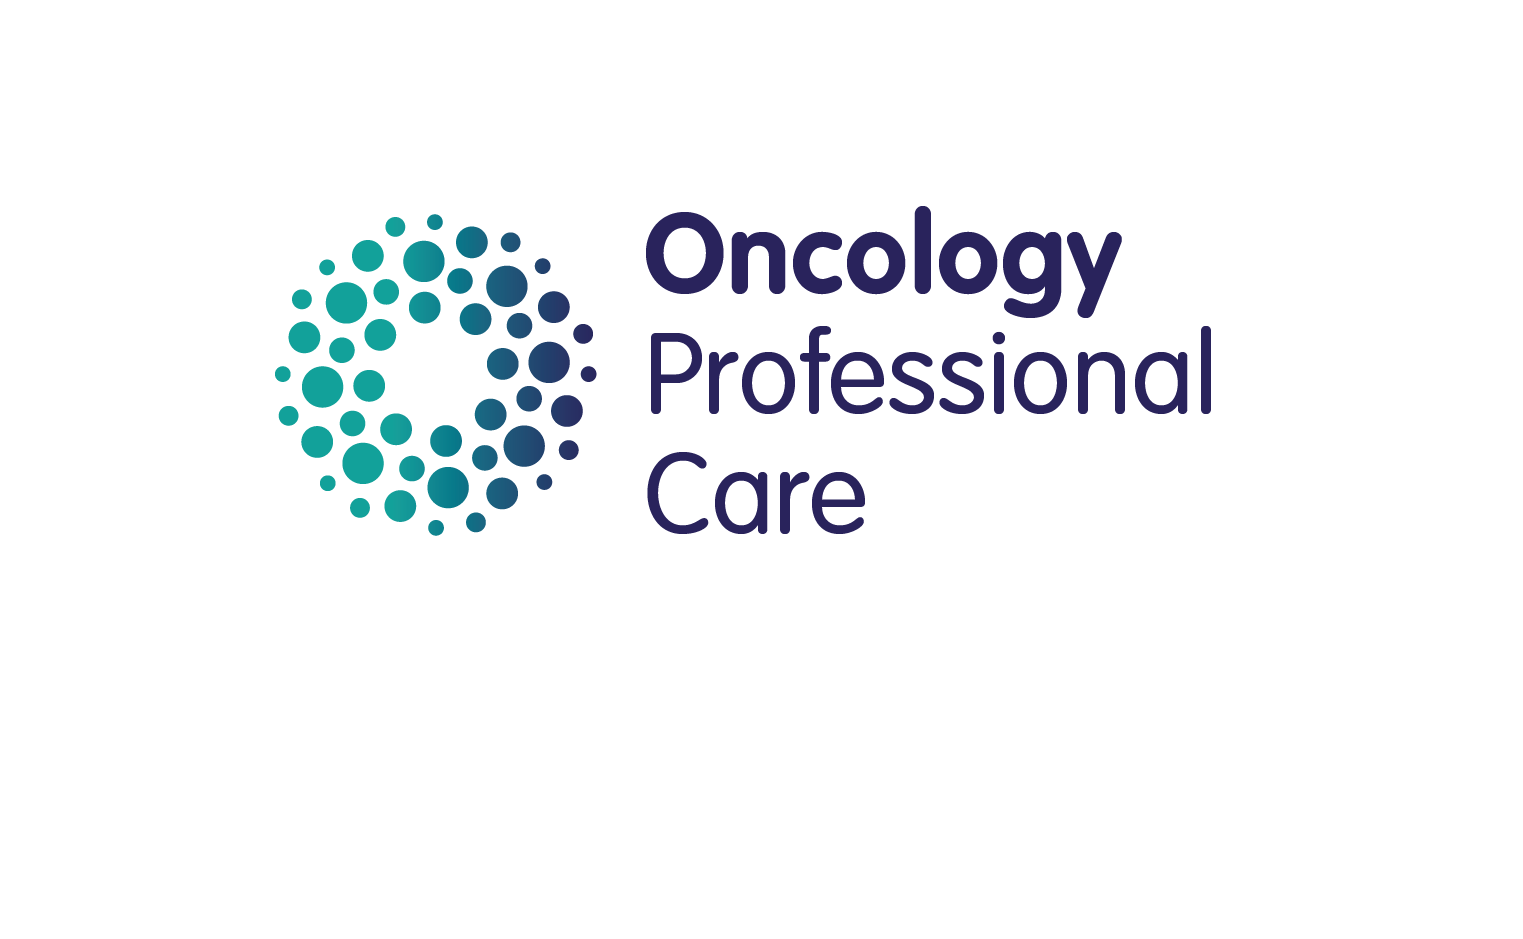 Oncology Professional Care logo